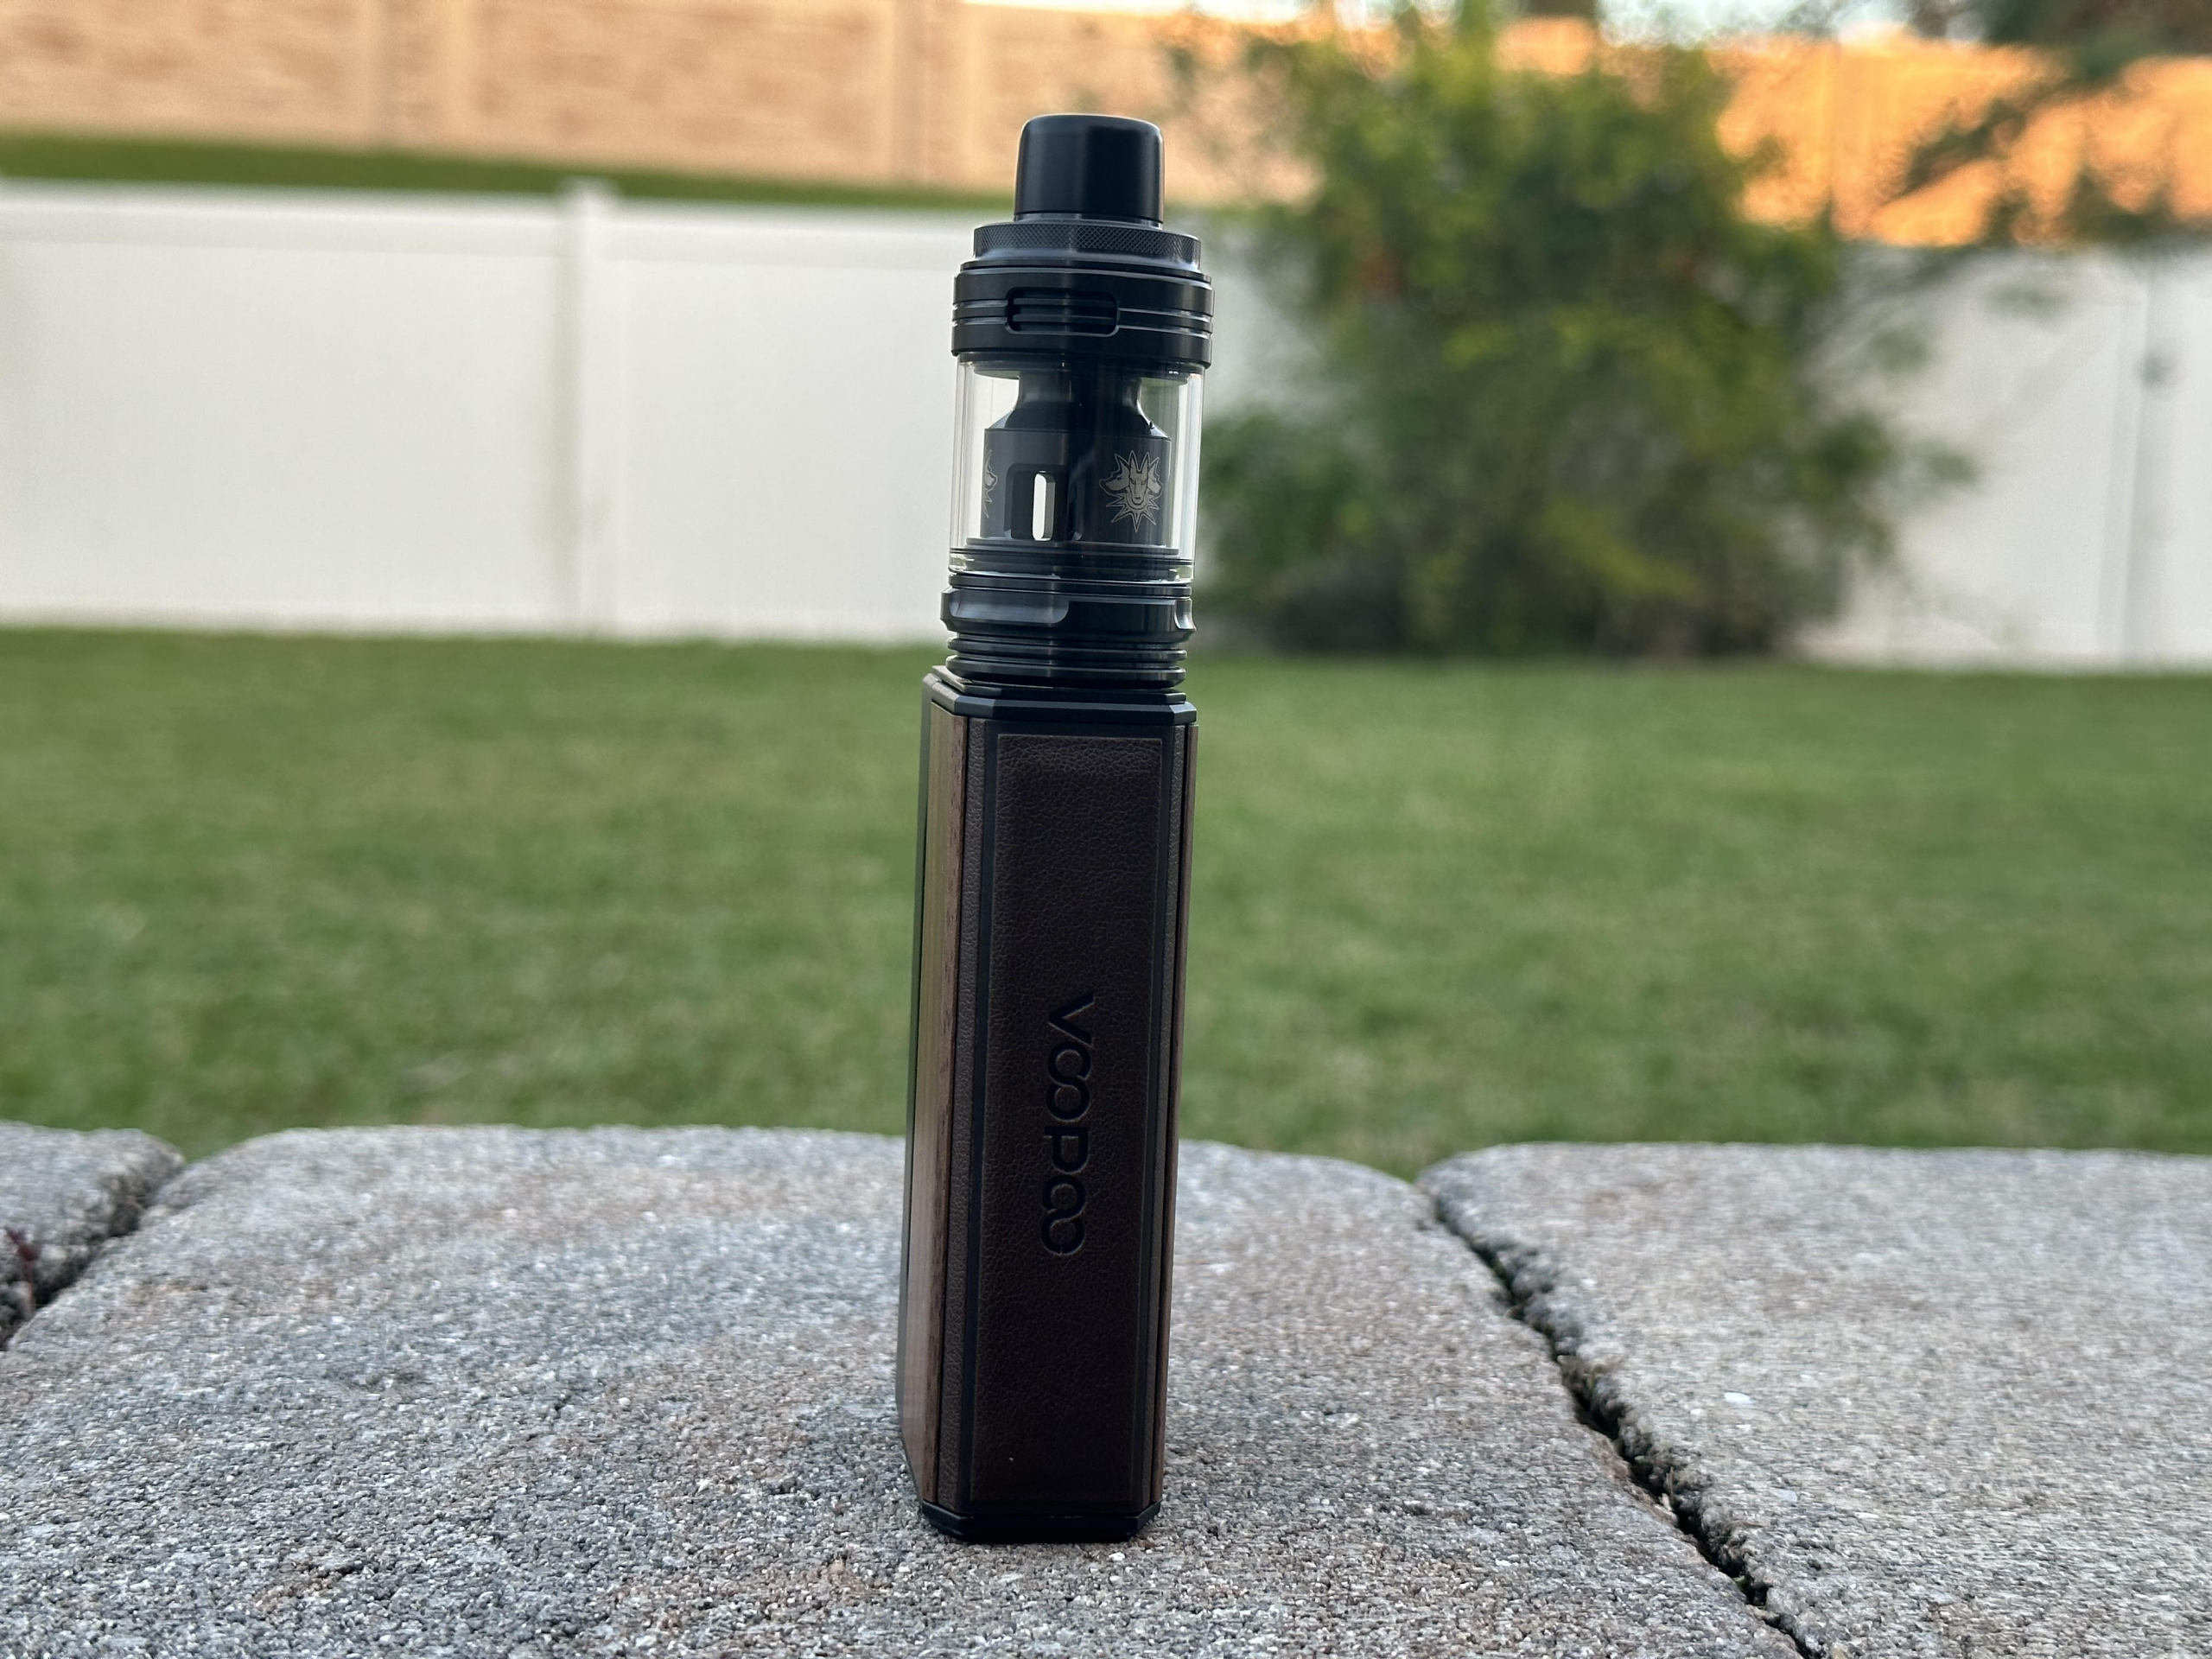 Voopoo drag 4 review image 5 voopoo drag 4 review